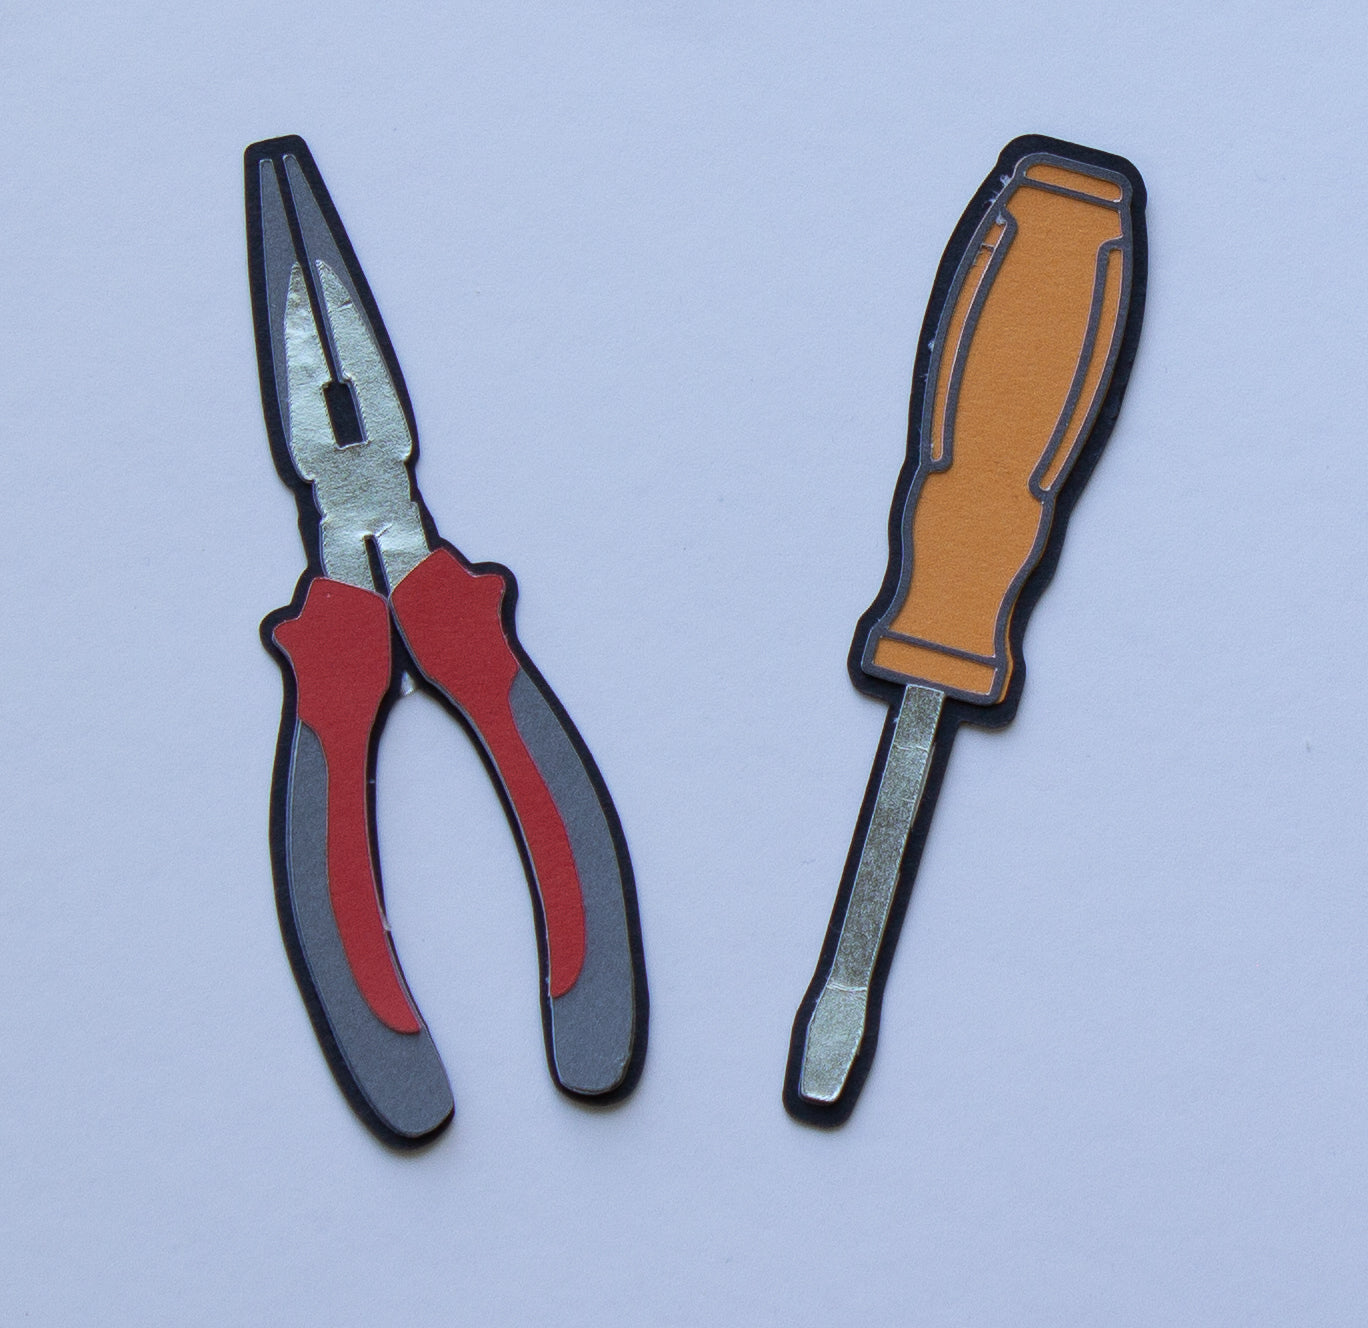 Element: Tools - Plier and Screwdriver